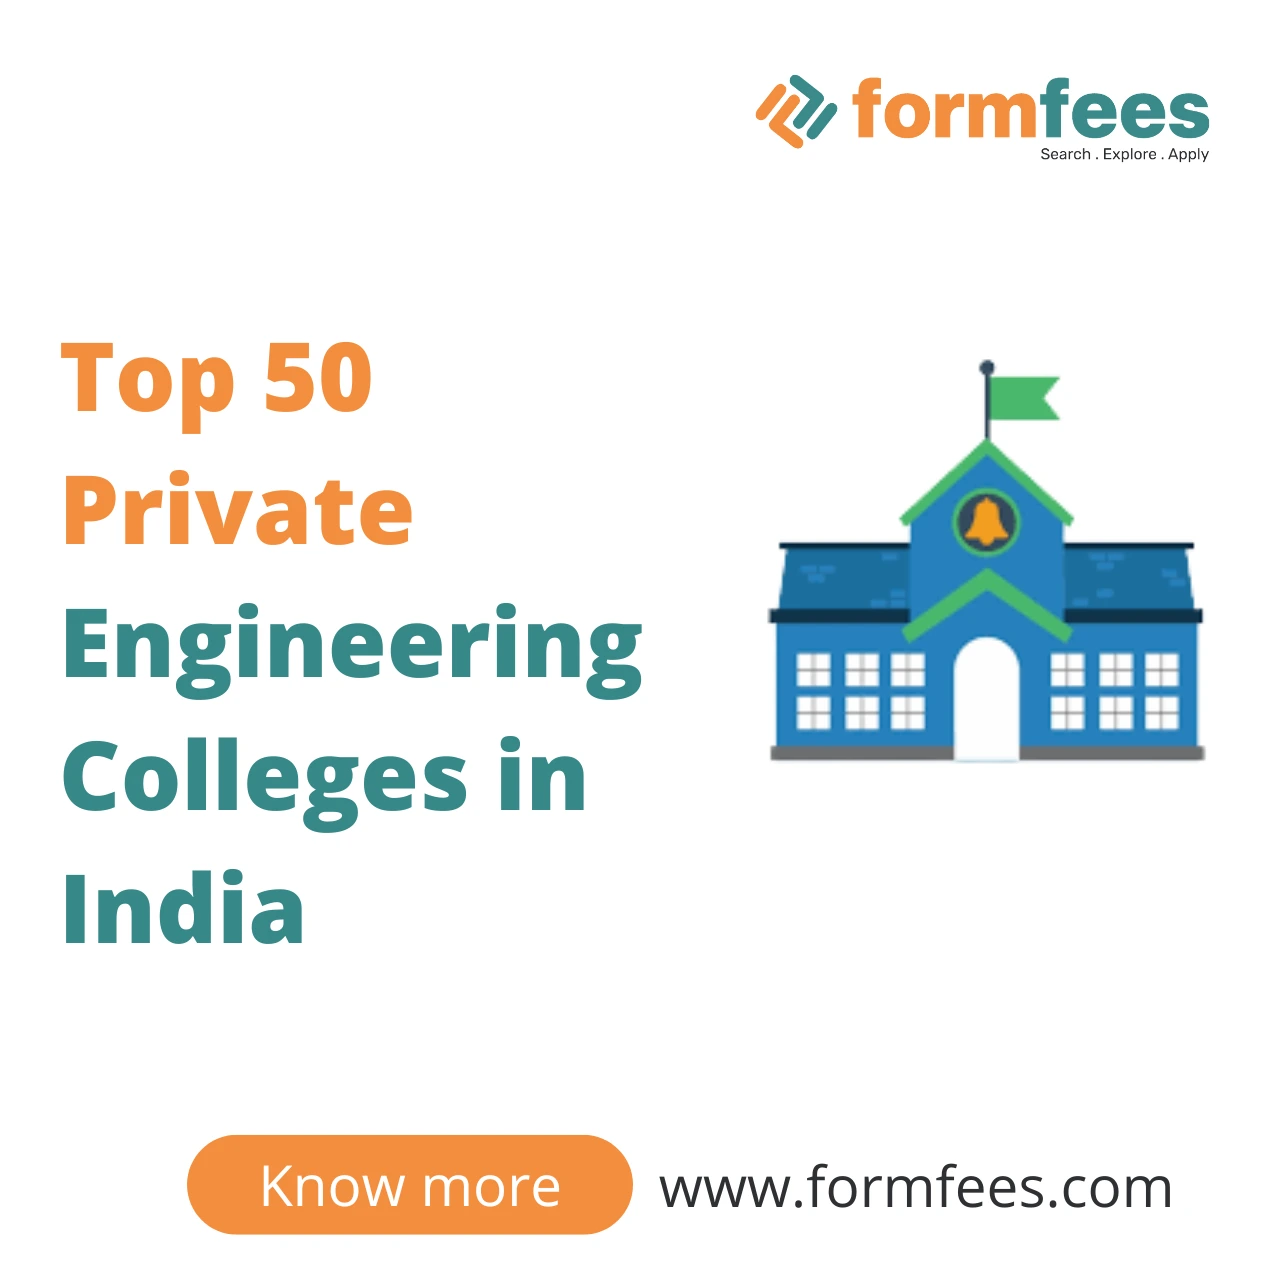 Top 50 Private Engineering Colleges in India